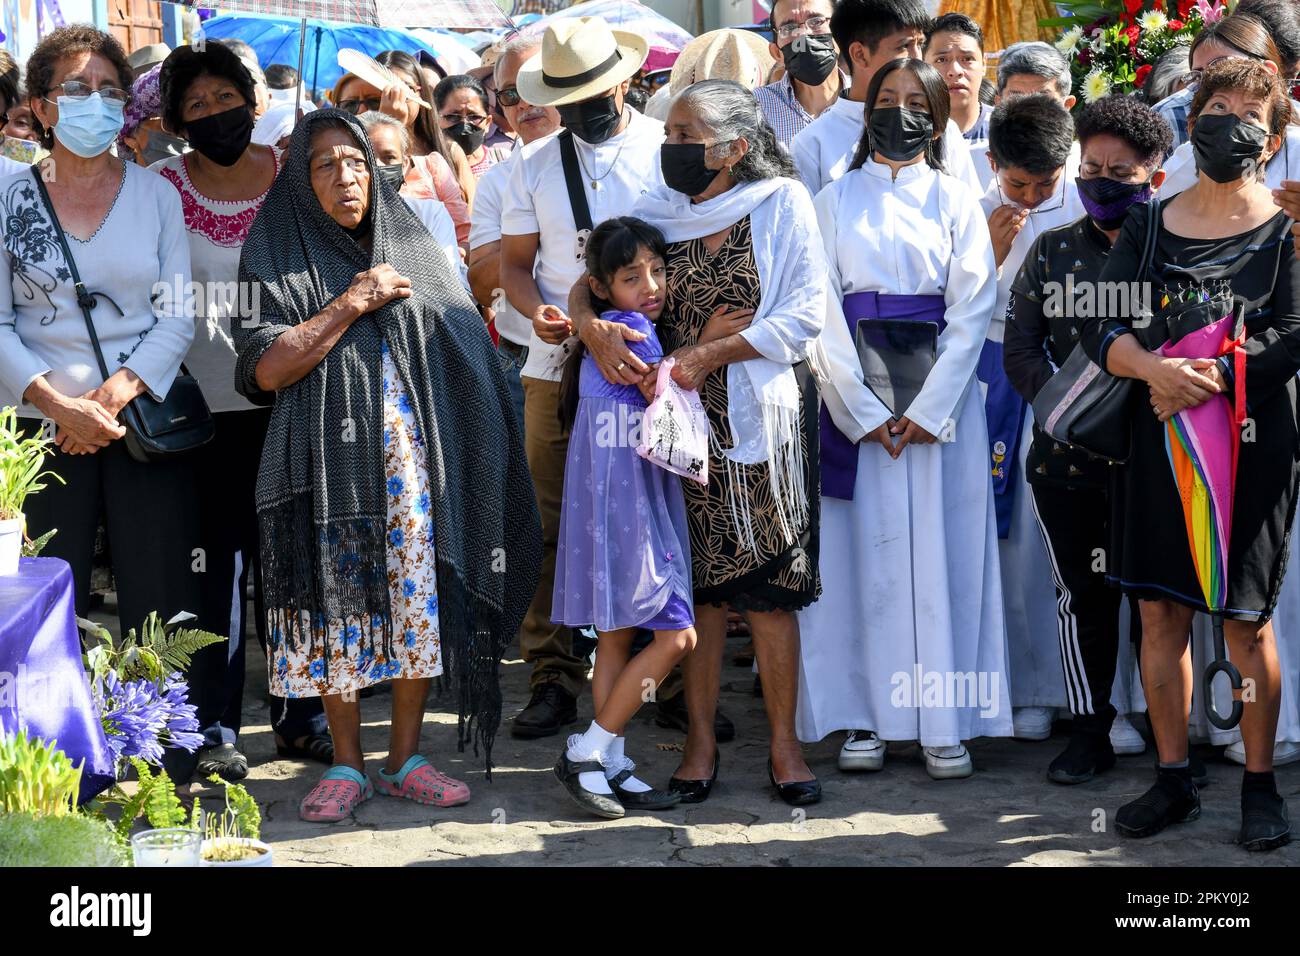 Parish members listening to prayers n front of neighbourhood altears during the Good Friday Silent procession, City of Oaxaca, Mexico Stock Photo